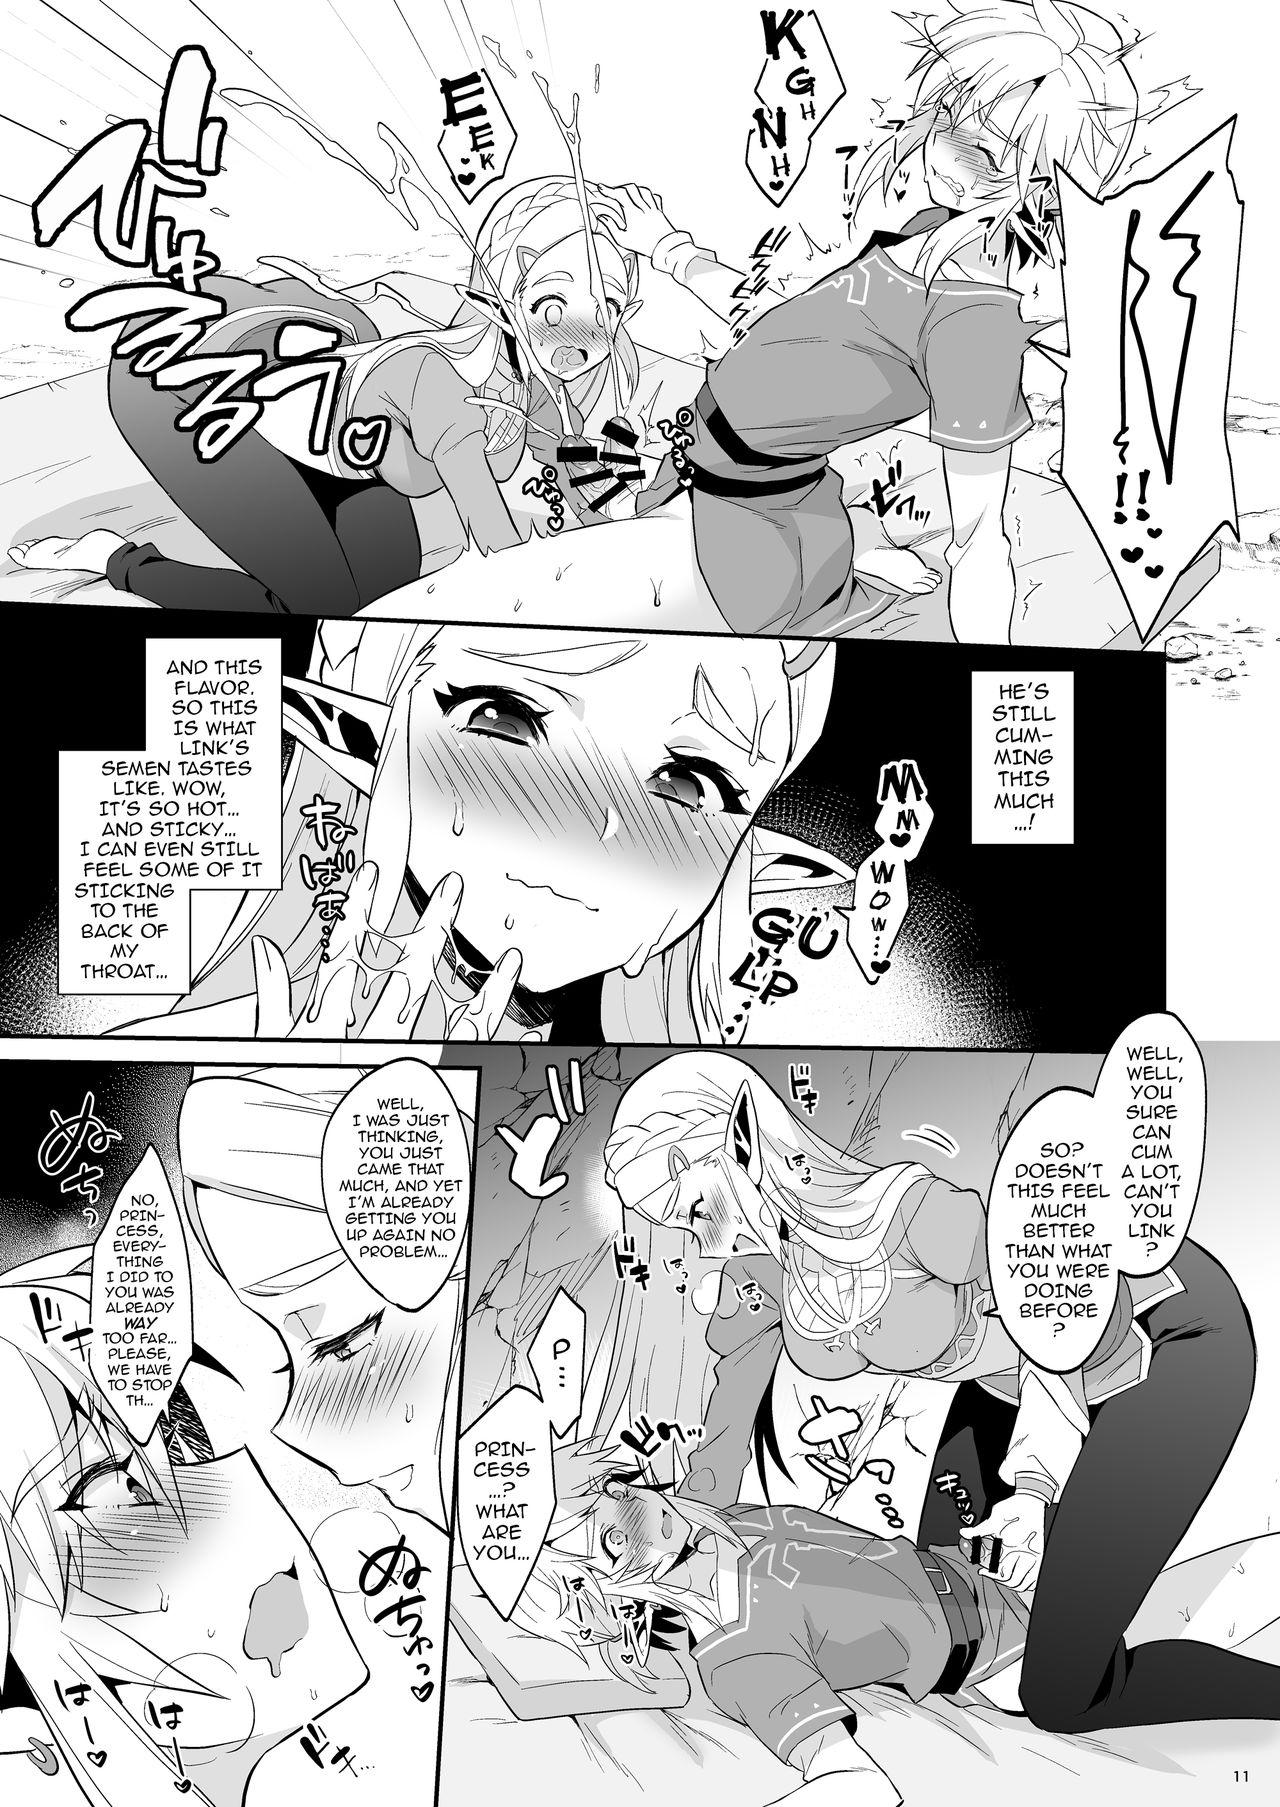 Super Hot Porn Hyrule Hanei no Tame no Katsudou! | Activities for the Sake of Hyrule’s Future! - The legend of zelda Gaypawn - Page 12